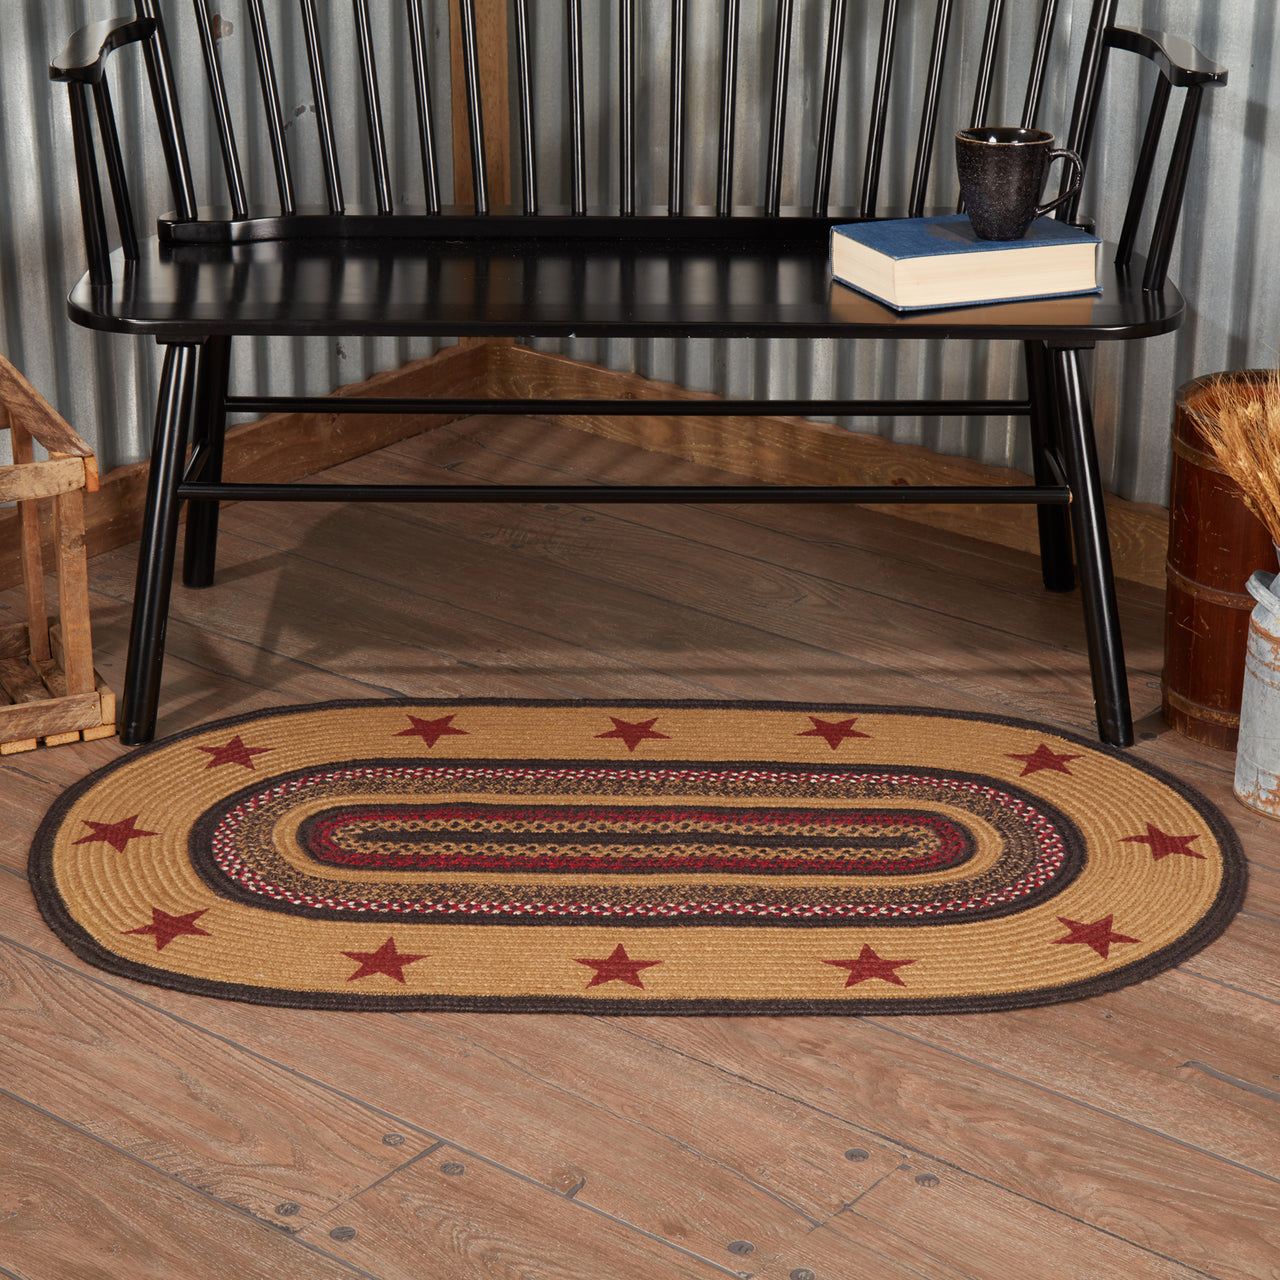 Landon Jute Braided Rug Oval Stencil Stars 27"x48" with Rug Pad VHC Brands